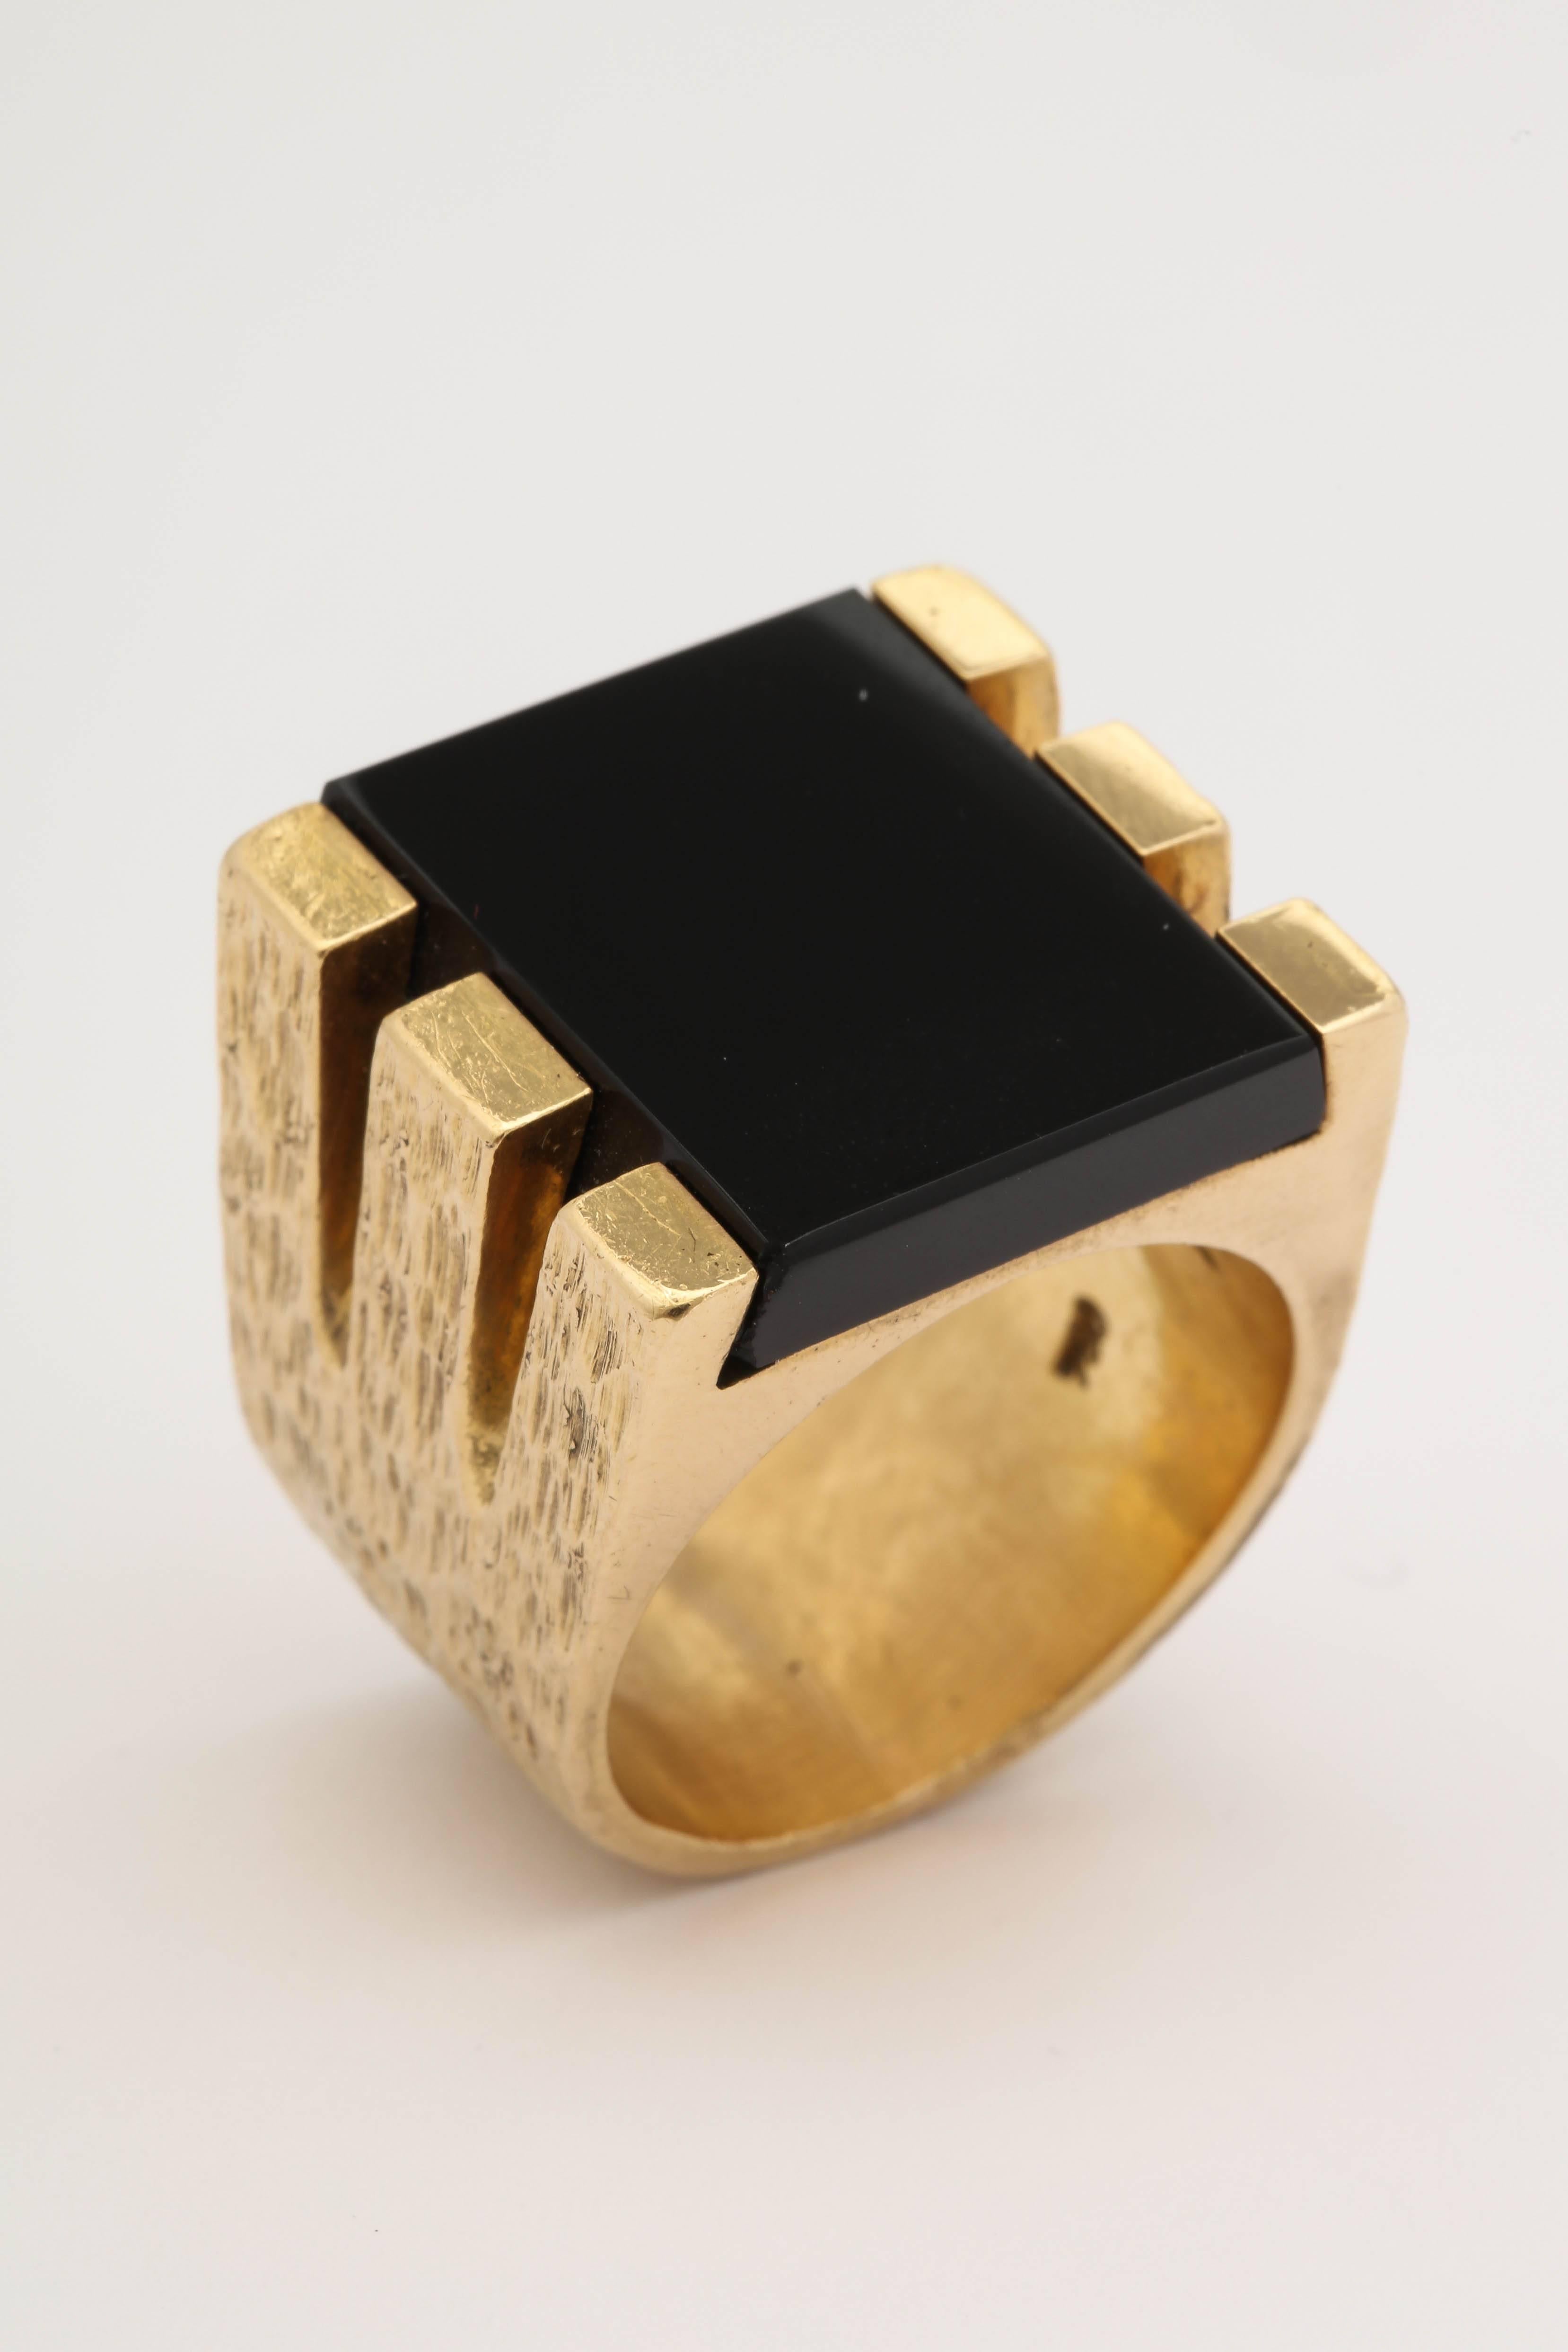 One Unisex Large 18kt Textured Gold Ring Cenering A 22mm Square Cut Onyx stone. Onyx Is Beautifully Set In A Heavy Six Prong Bar Structure.Ring Is Stamped 750 For a European 18kt Gold Marking. Designed In The 1970's With An Unrecognizable Makers